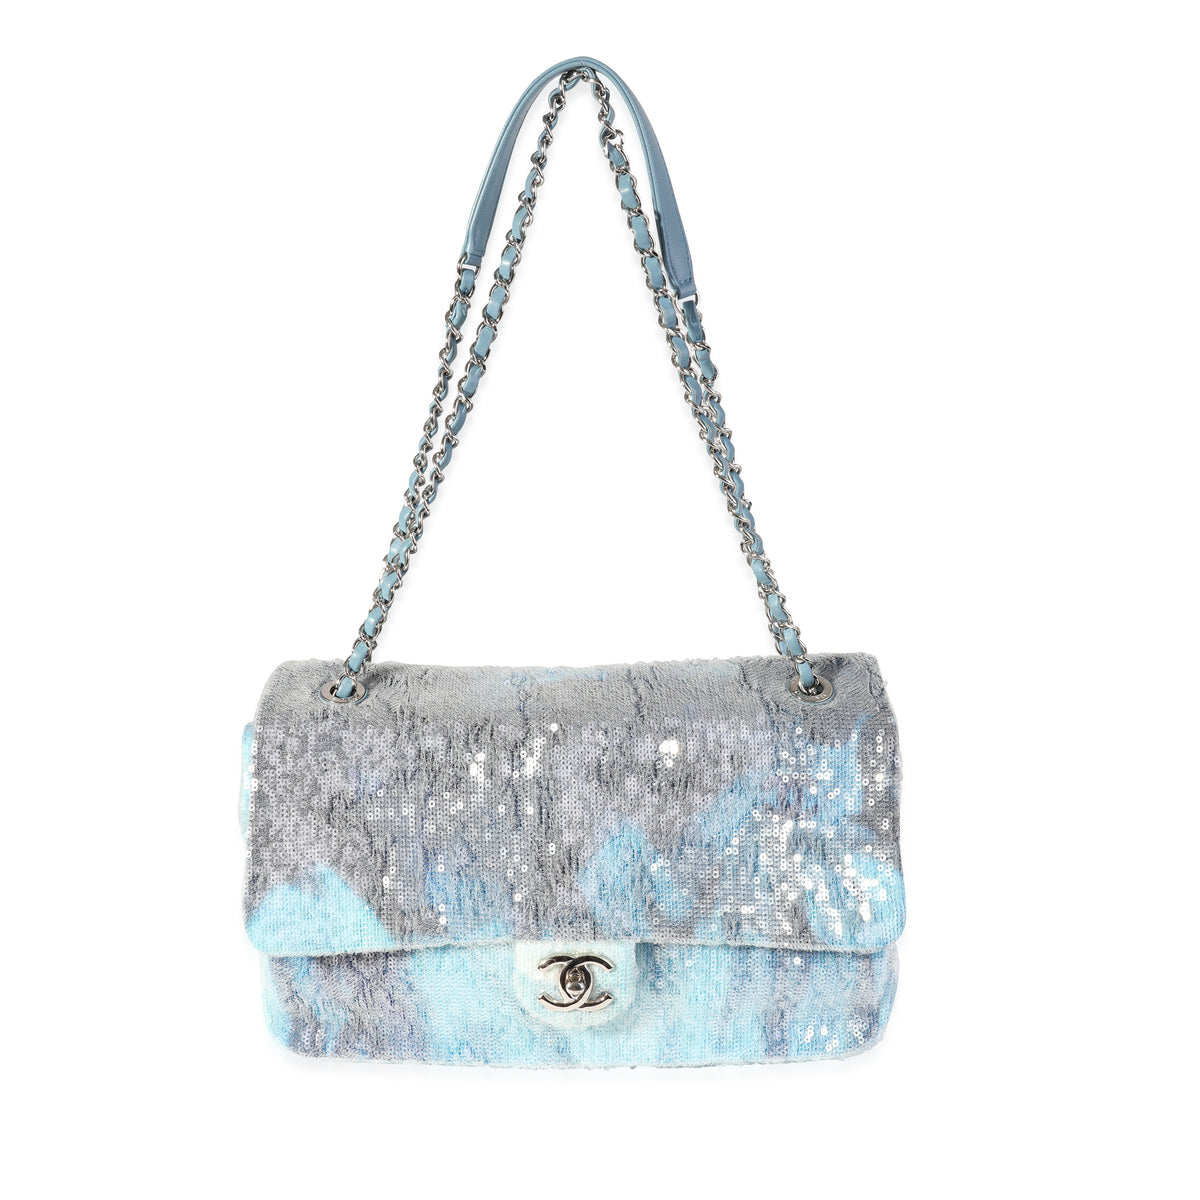 Chanel Sequin Waterfall Small Flap Bag